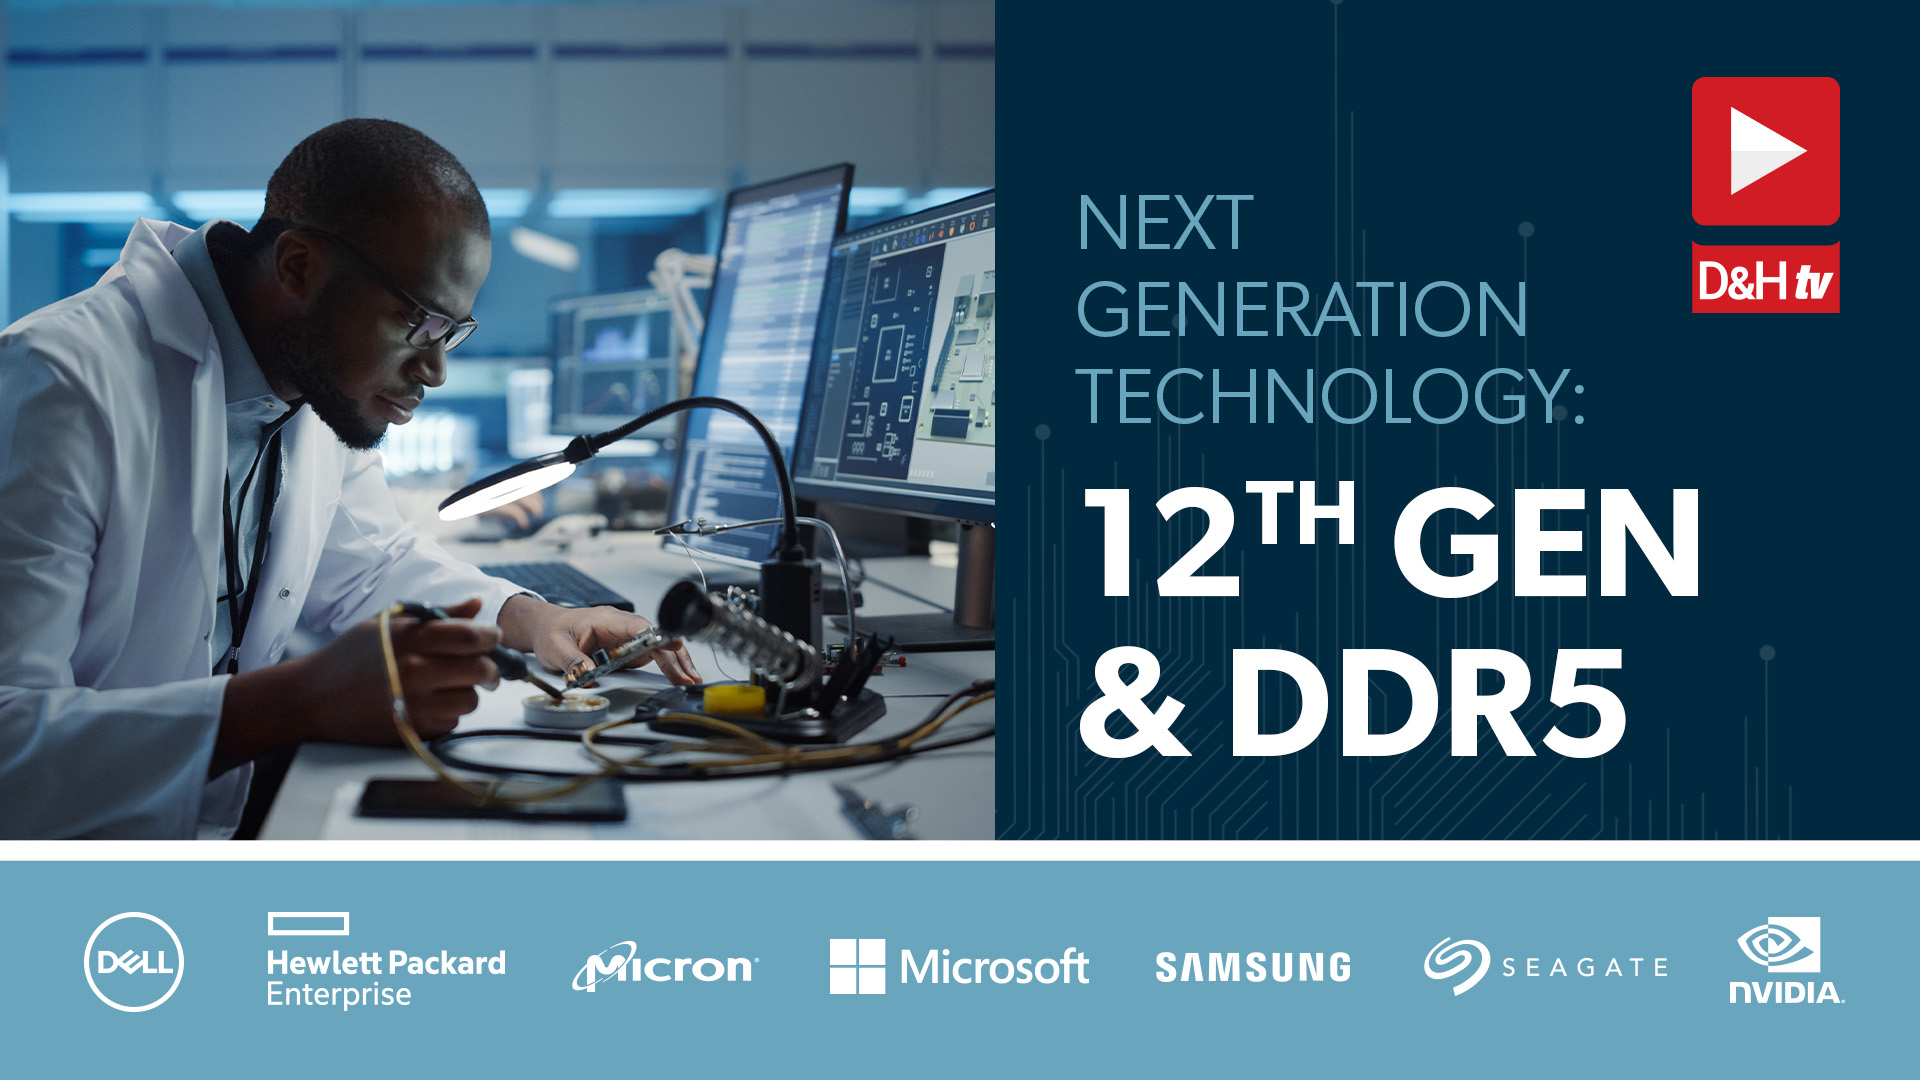 Next Generation Technology: 12th Gen and DDR5